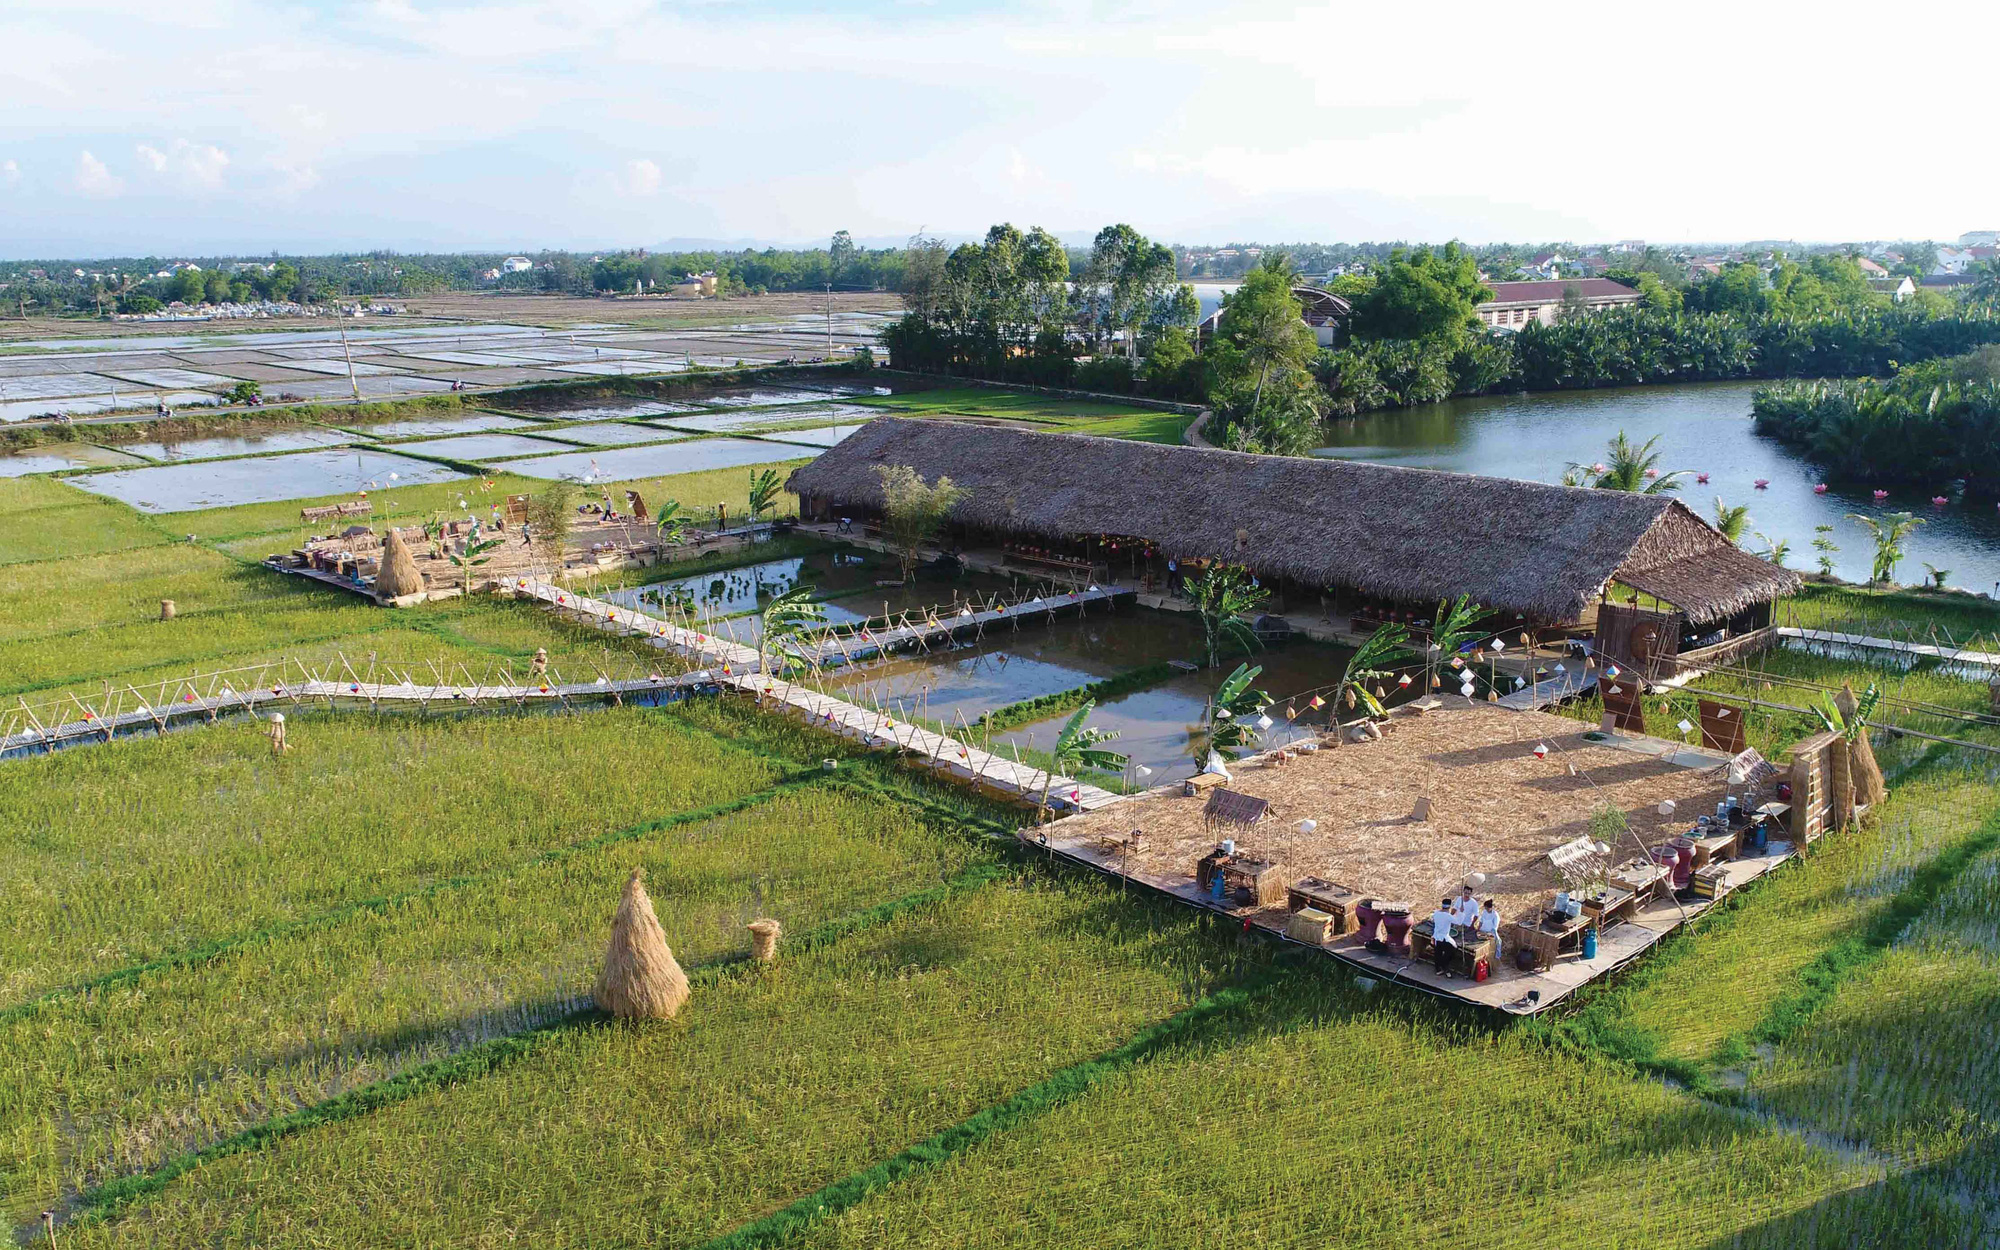 A bird eye's view of The Field Restaurant located in Cam Thanh Commune, Hoi An City, Quang Nam Province in central Vietnam. Photo: Thai Ba Dung / Tuoi Tre